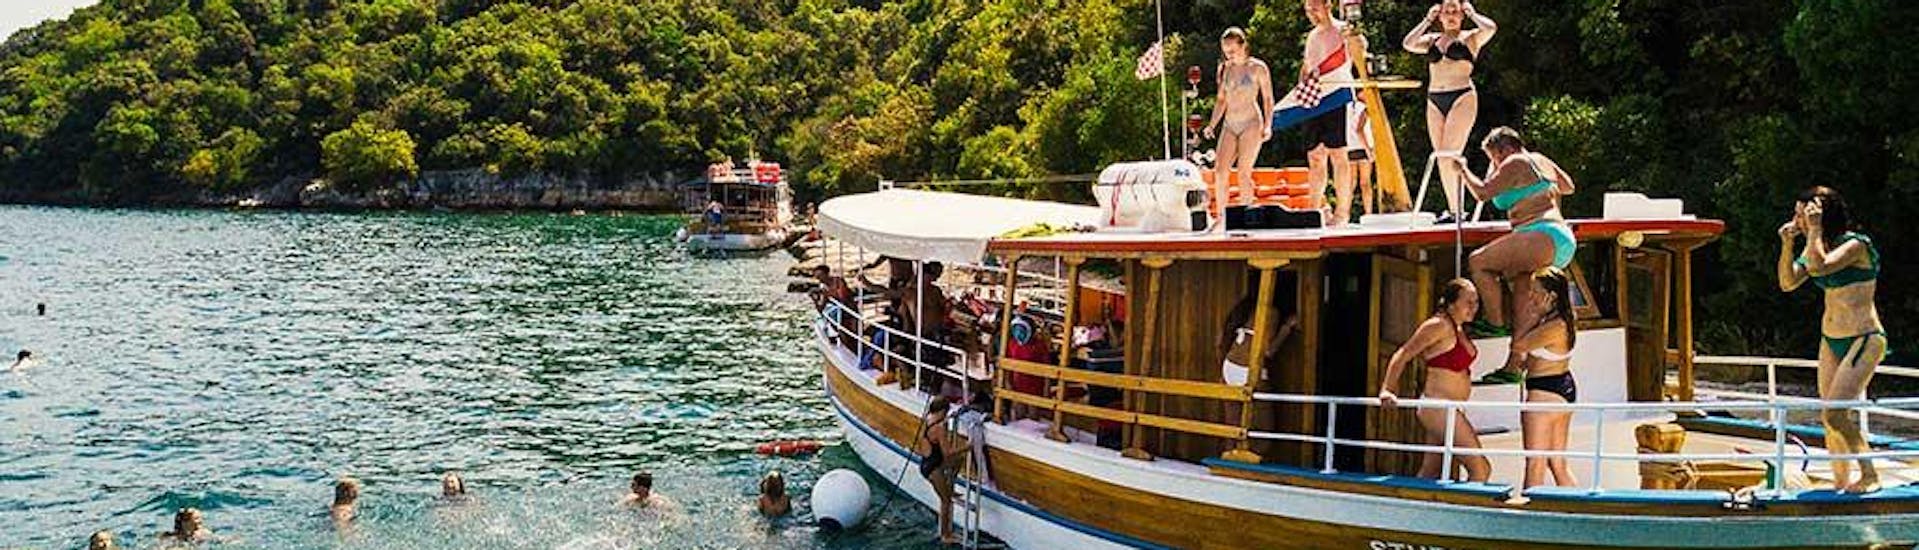 A group enjoys a private boat trip in Rovinj with Stupica Excursions